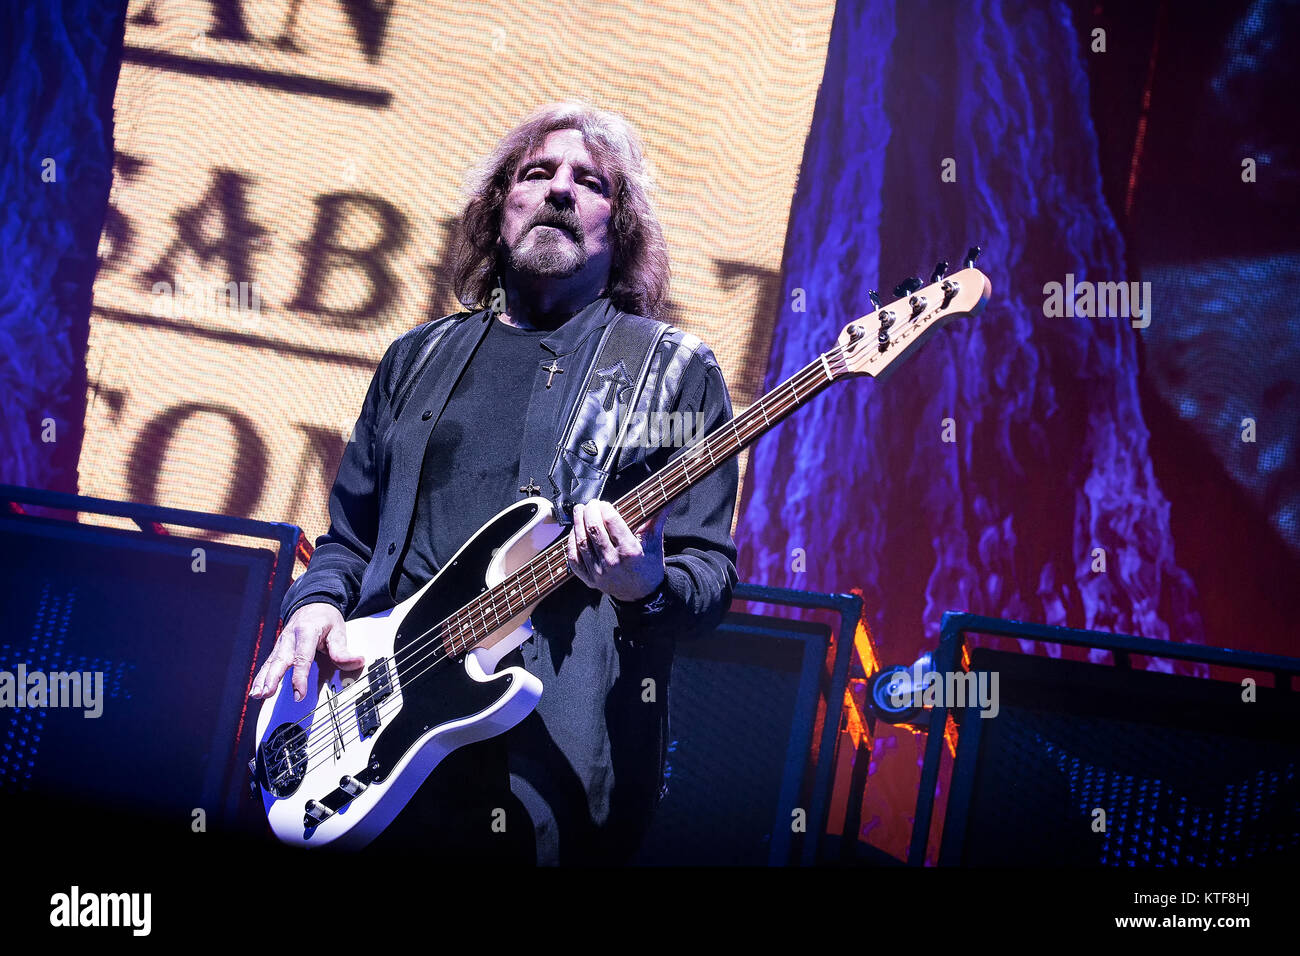 The English rock band Black Sabbath performs a live concert at Telenor Arena in Oslo. Here musician Geezer Butler on bass is seen live on stage. Norway, 24/11 2013. Stock Photo